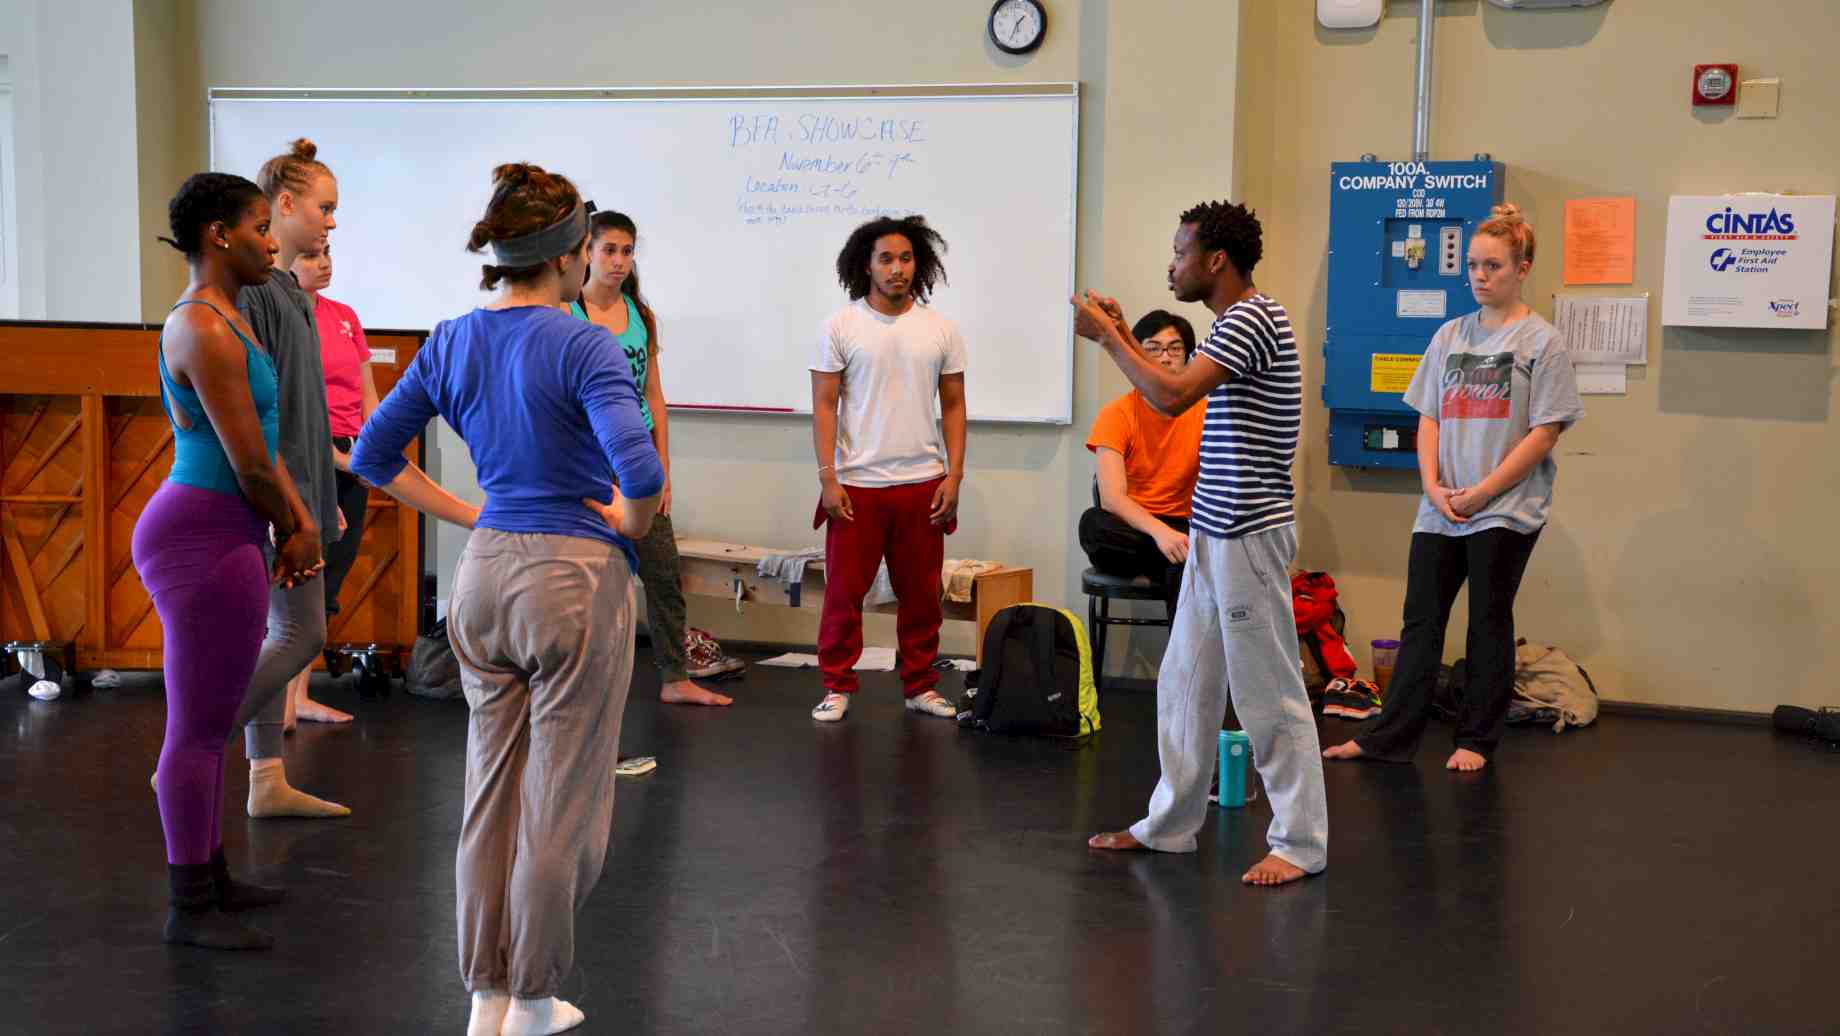 Faustin Linyekula teaching composition to students during the "Look Back, Dance Forward" residency, November 2014.